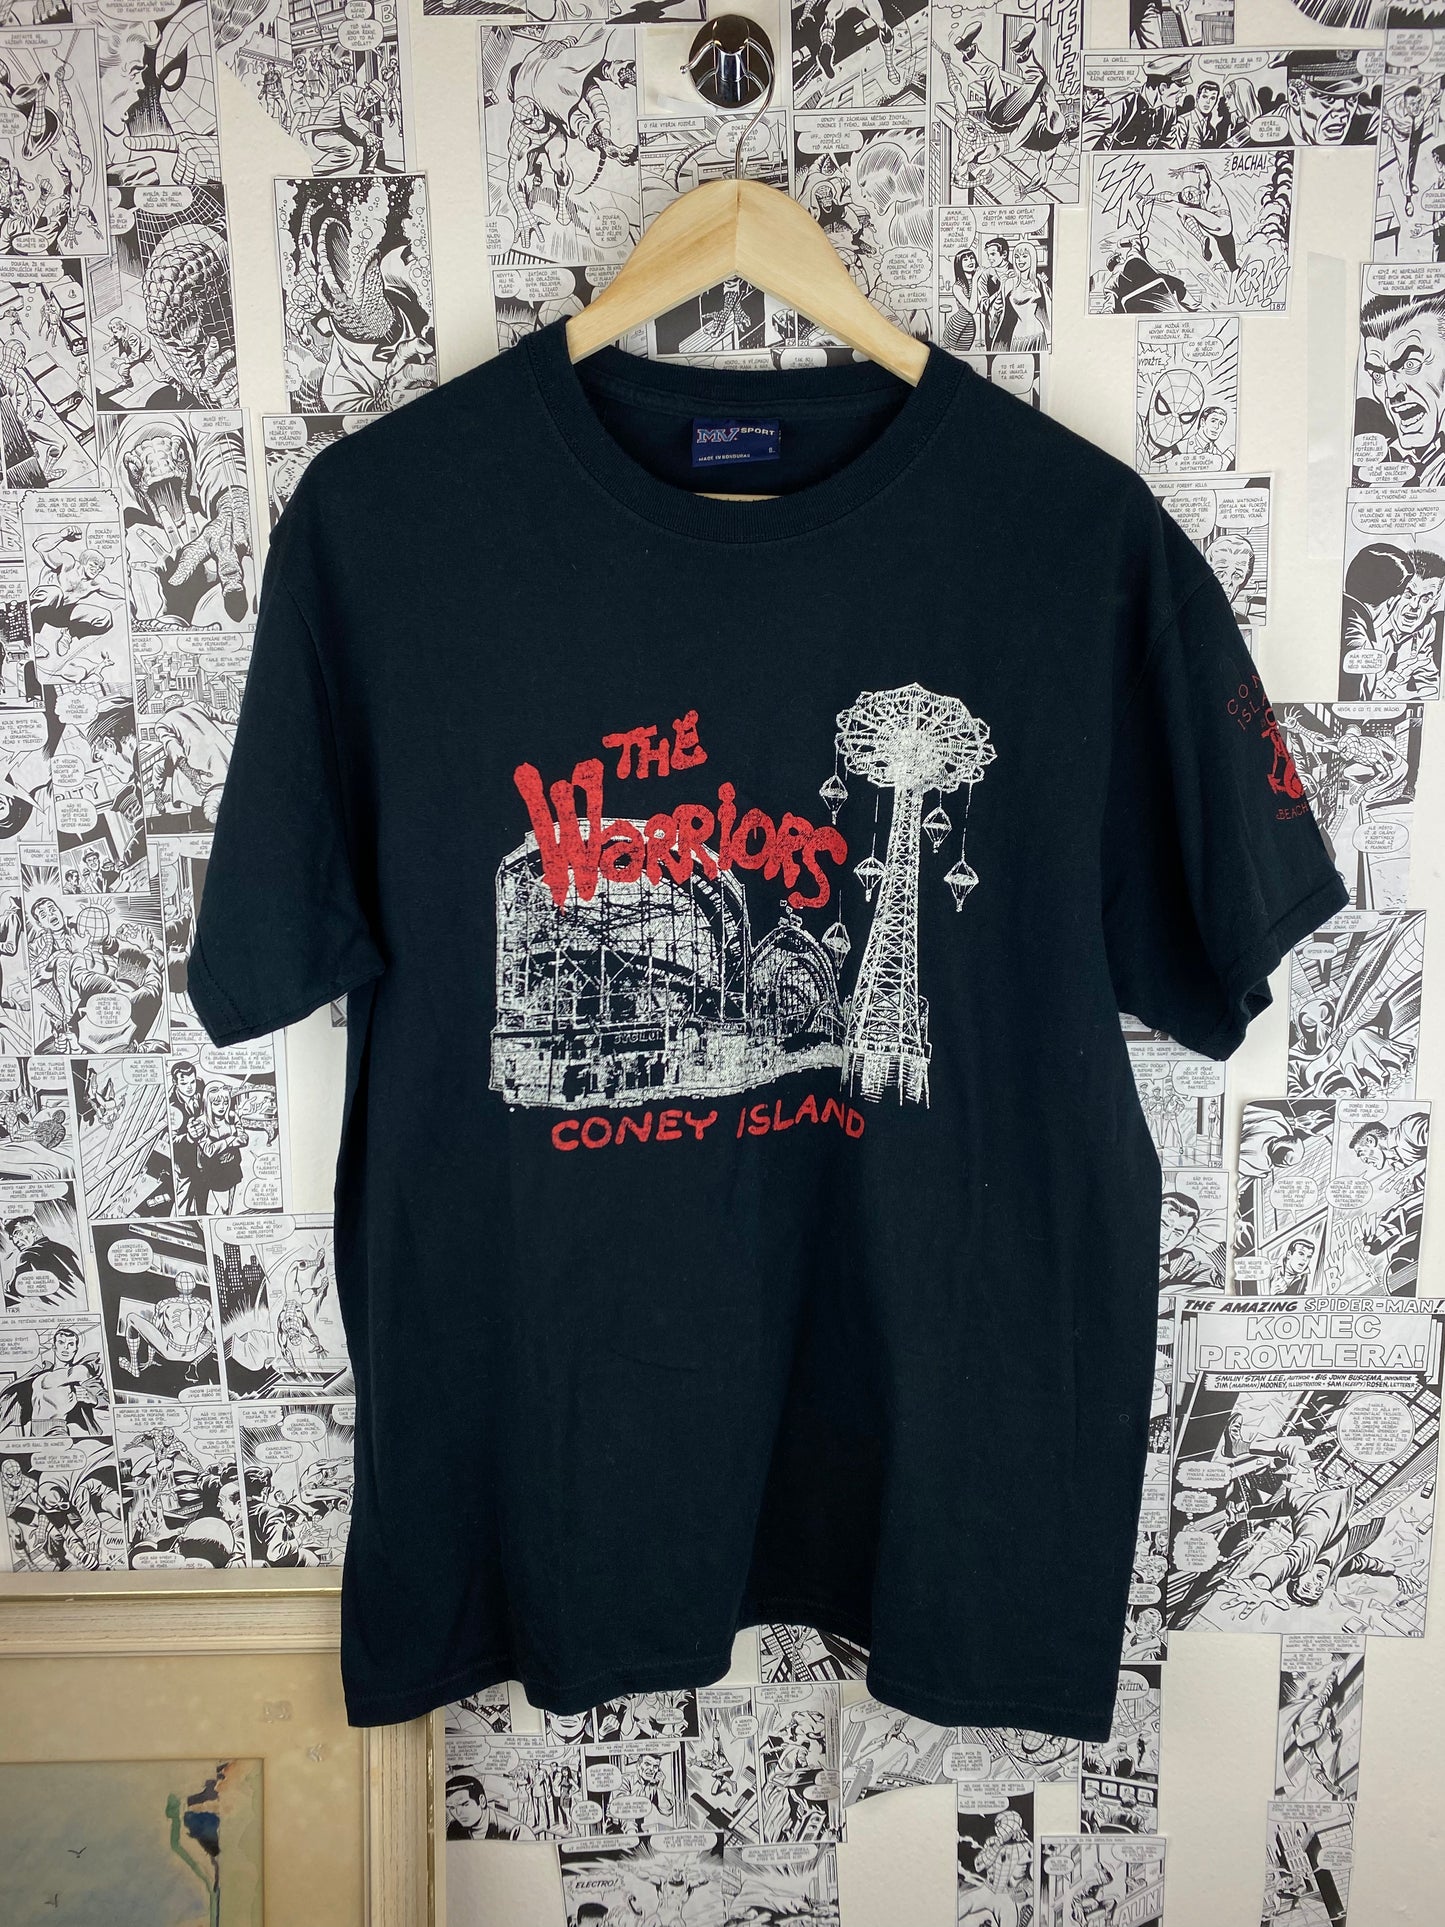 Vintage The Warrior - Coney Island 90s t-shirt - size L